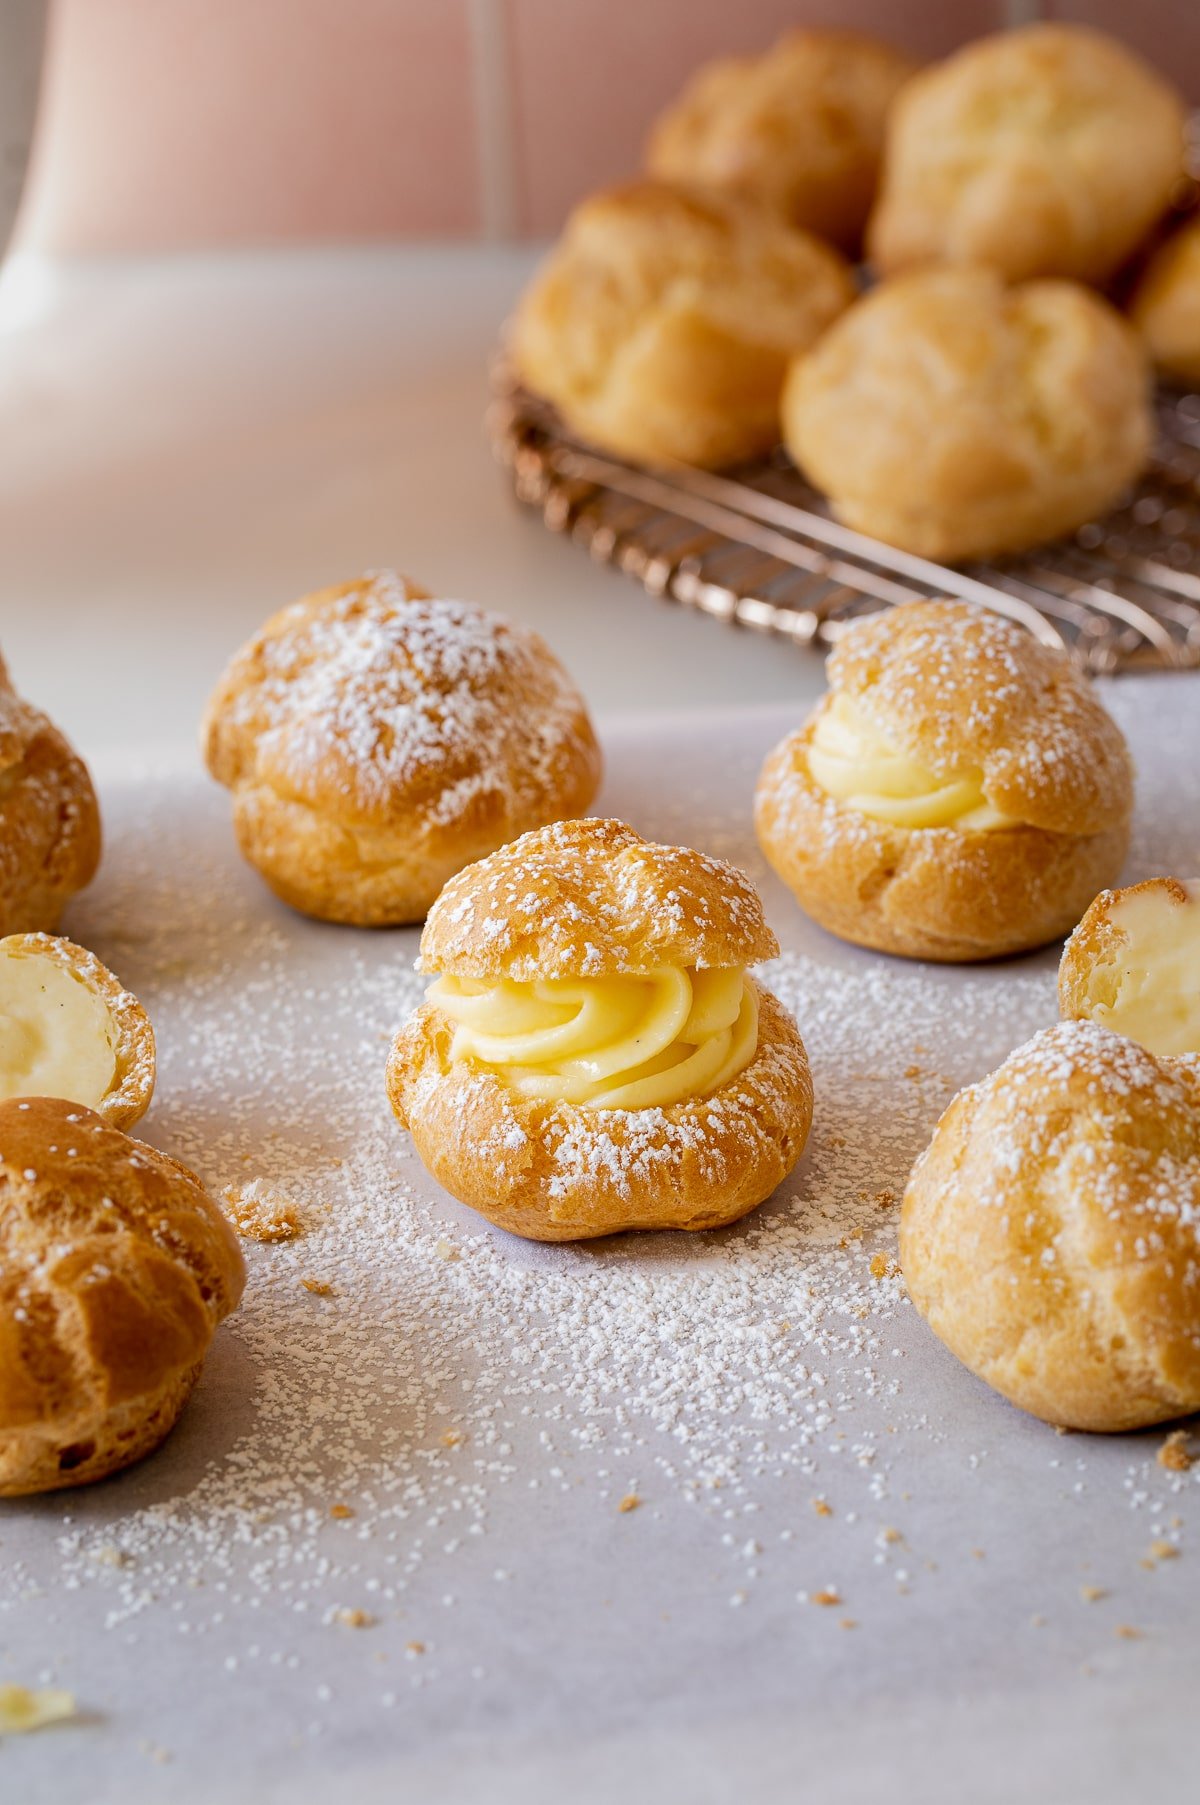 cream puff filled with pastry cream and topped with powdered sugar.